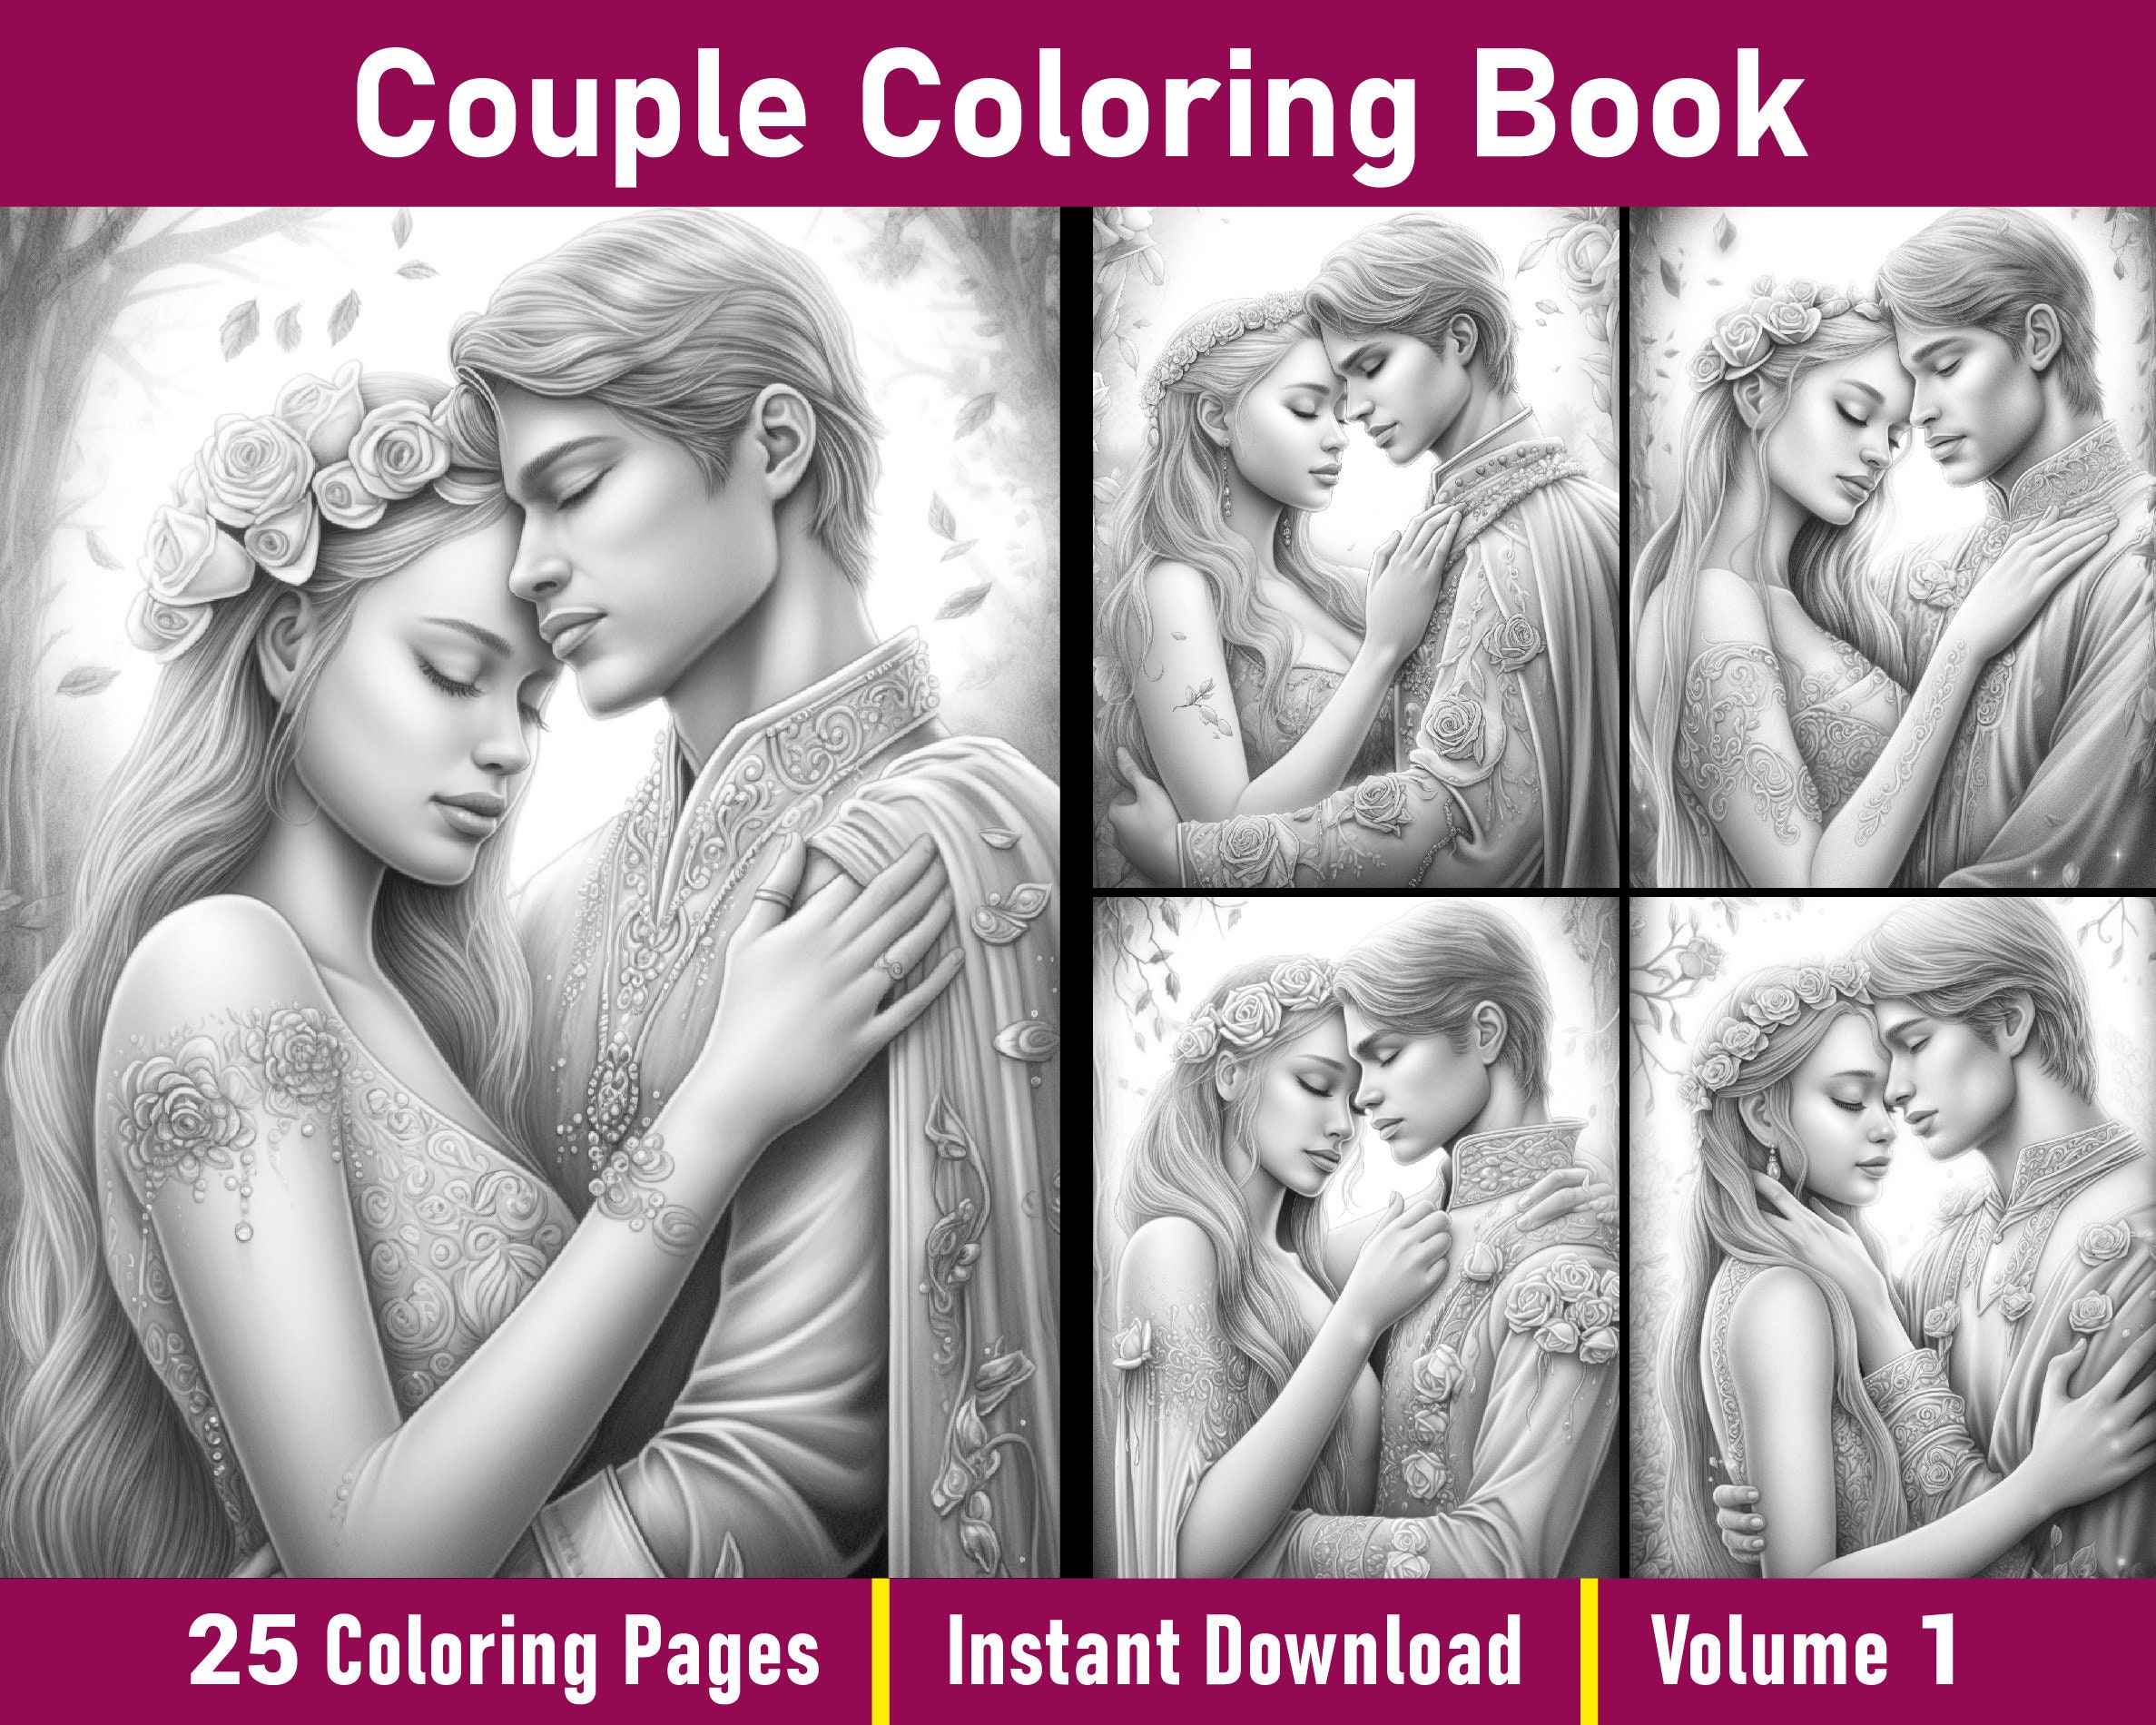 free coloring books on interracial married Porn Pics Hd